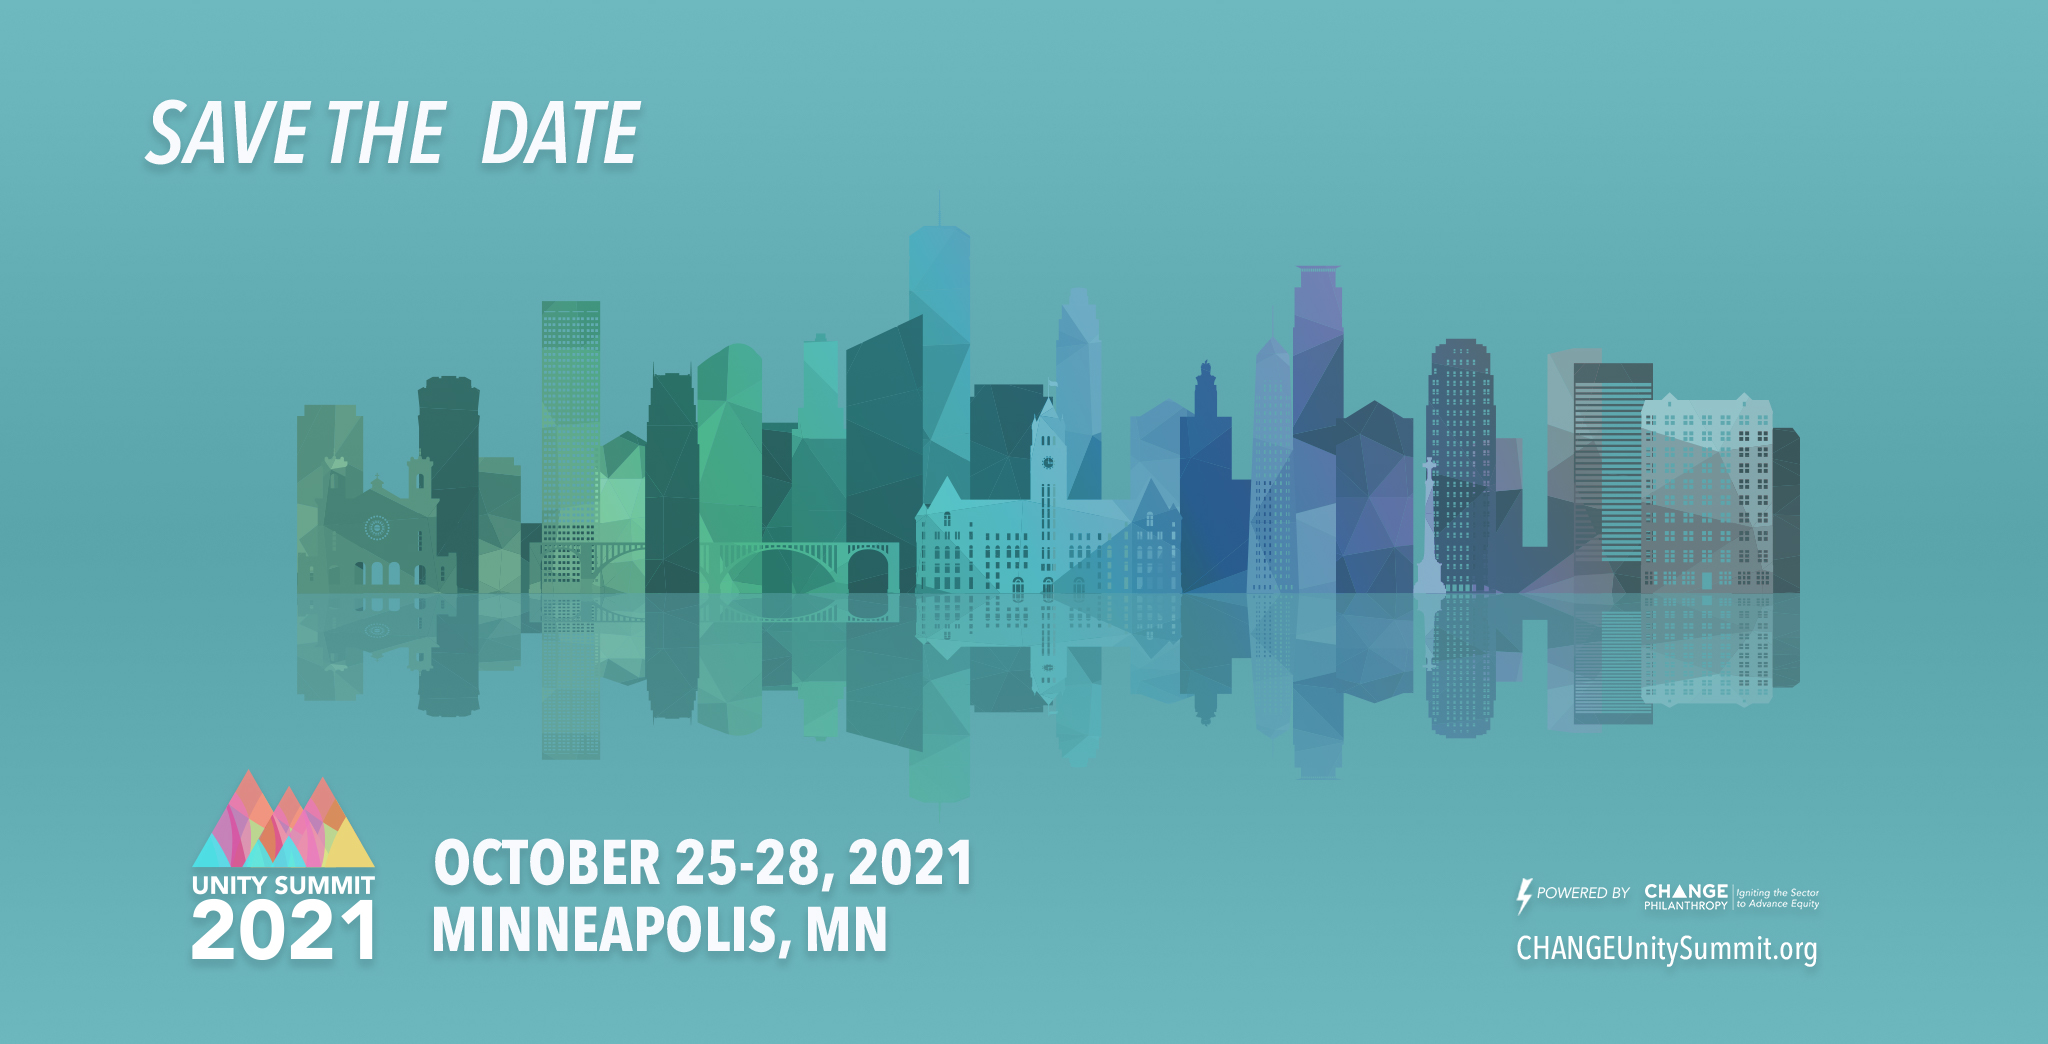 A save the date banner for the CHANGE Philanthropy Unity Summit on October 25-28, 2021, featuring a colorful illustration of the Minneapolis, Minnesota skyline.